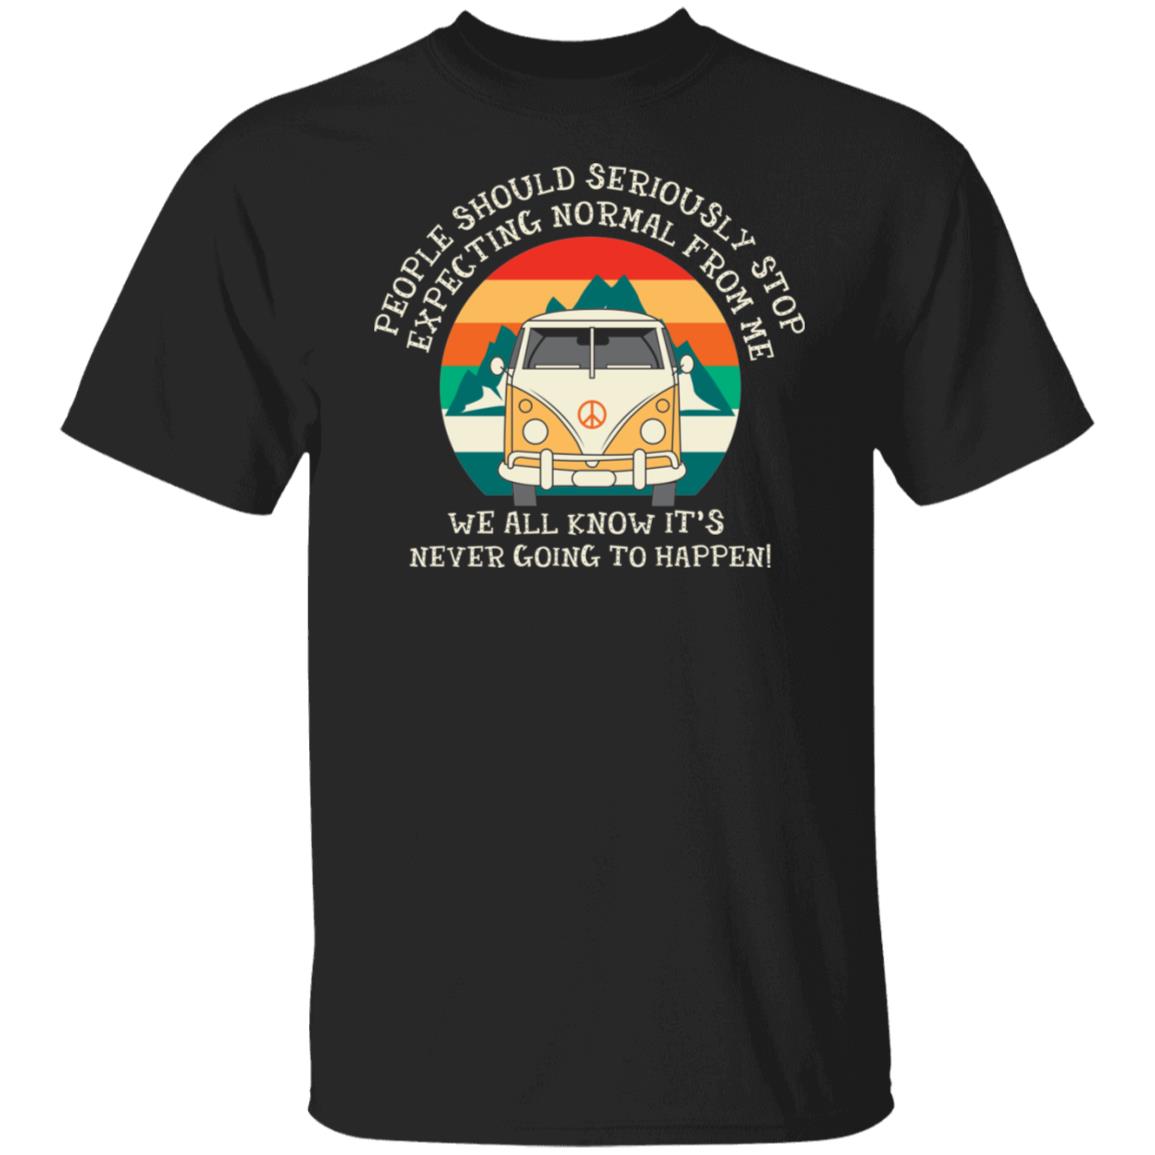 People Should Seriously Stop Expecting Normal From Me We All Know It's Never Going to Happen Hippie Sign Camping Shirt